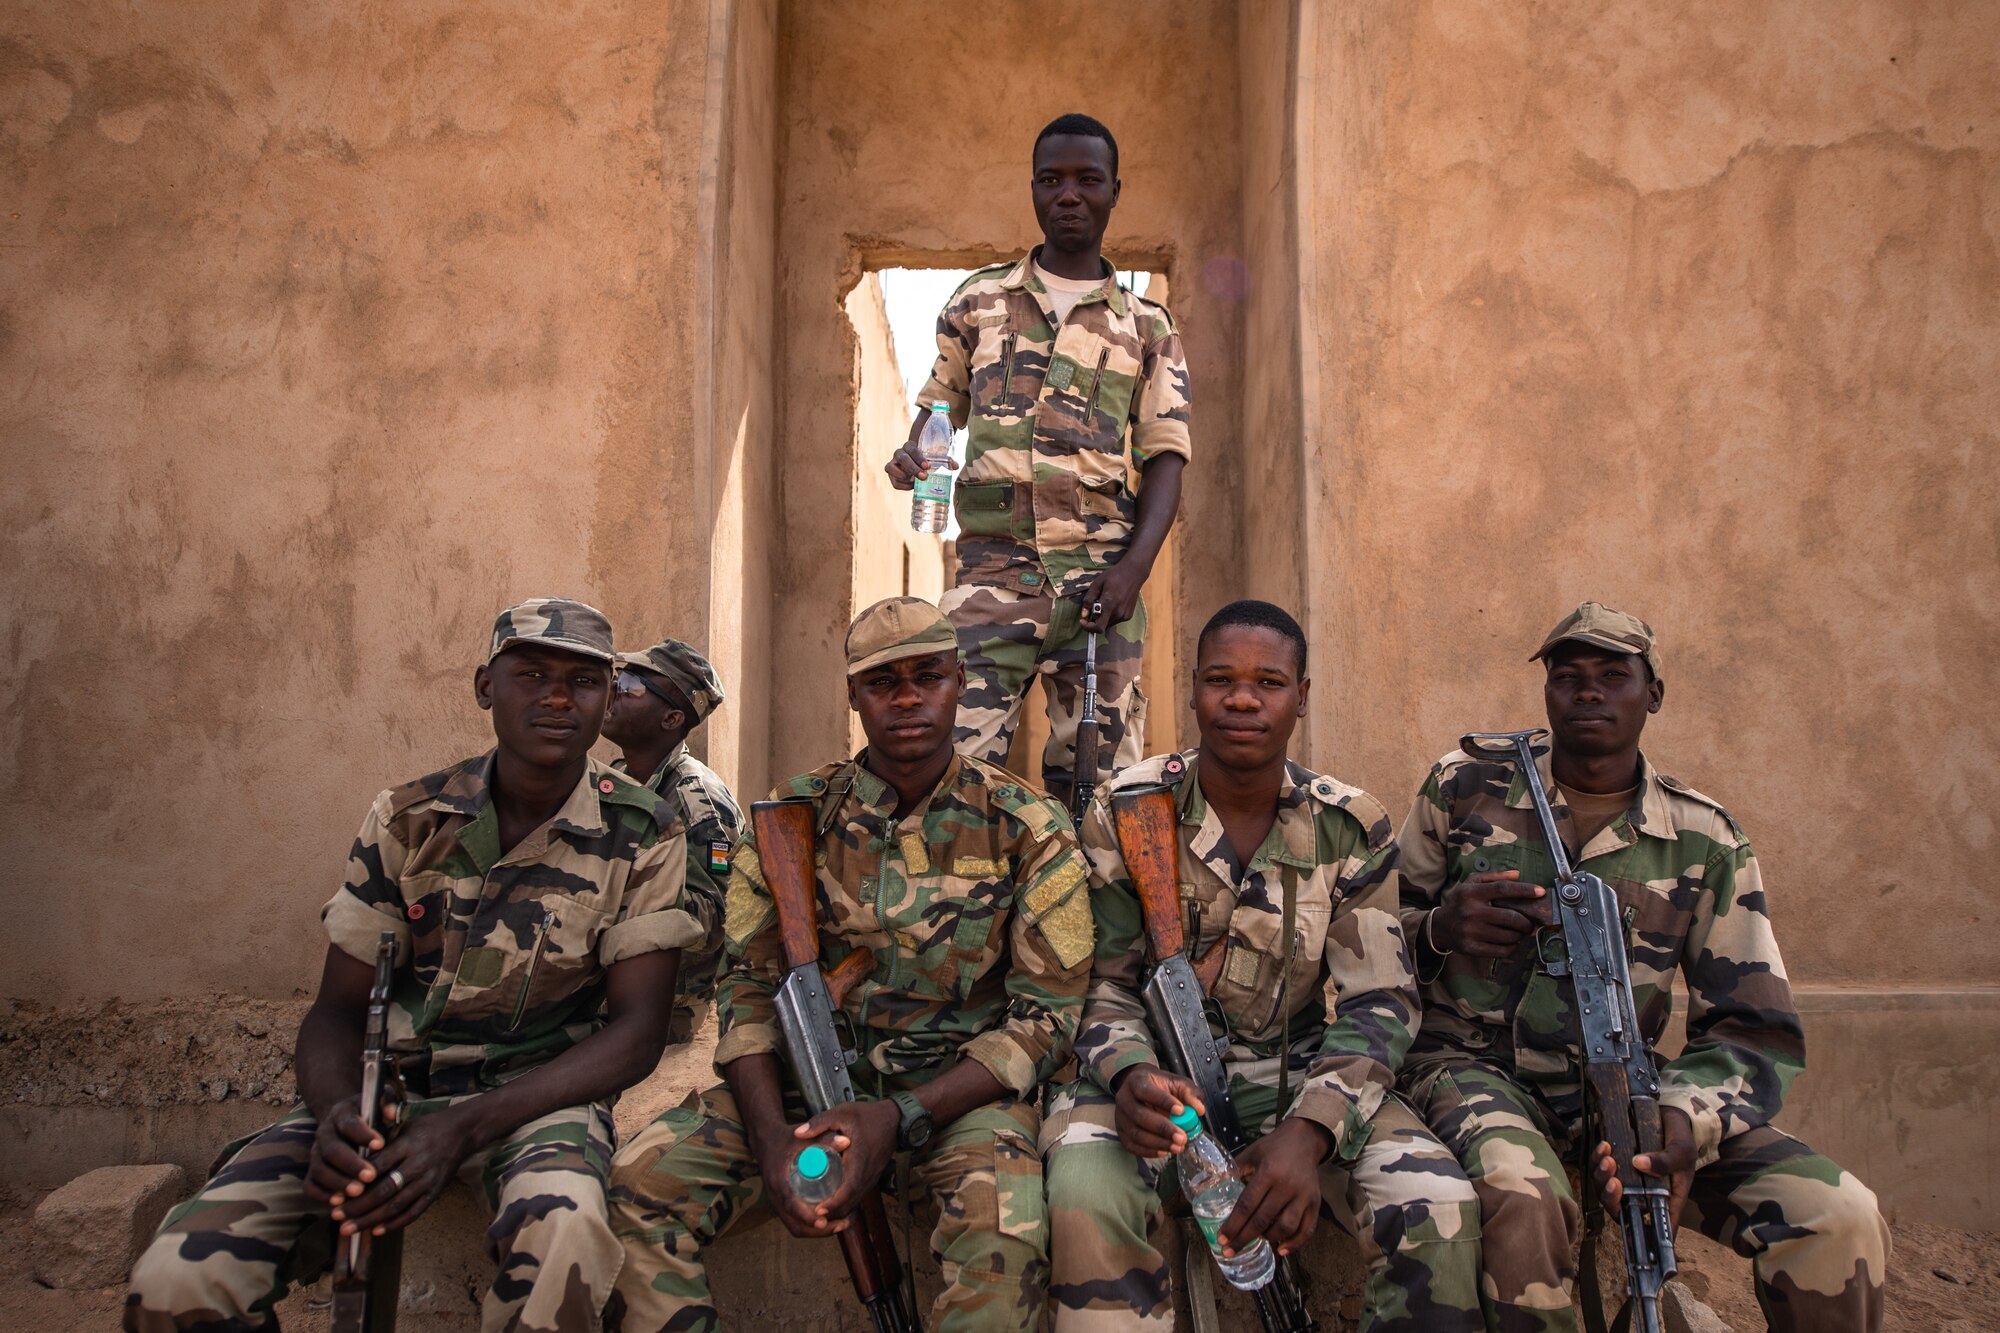 Niger Armed Forces (French language: Forces Armées Nigeriennes) members take a break during a training exercise with the 409th Expeditionary Security Forces Squadron air advisors at the FAN compound on Nigerien Air Base 201 in Agadez, Niger, July 10, 2019. The air advisors train the FAN on a daily basis, increasing their readiness and improving interoperability. (U.S. Air Force photo by Staff Sgt. Devin Boyer)